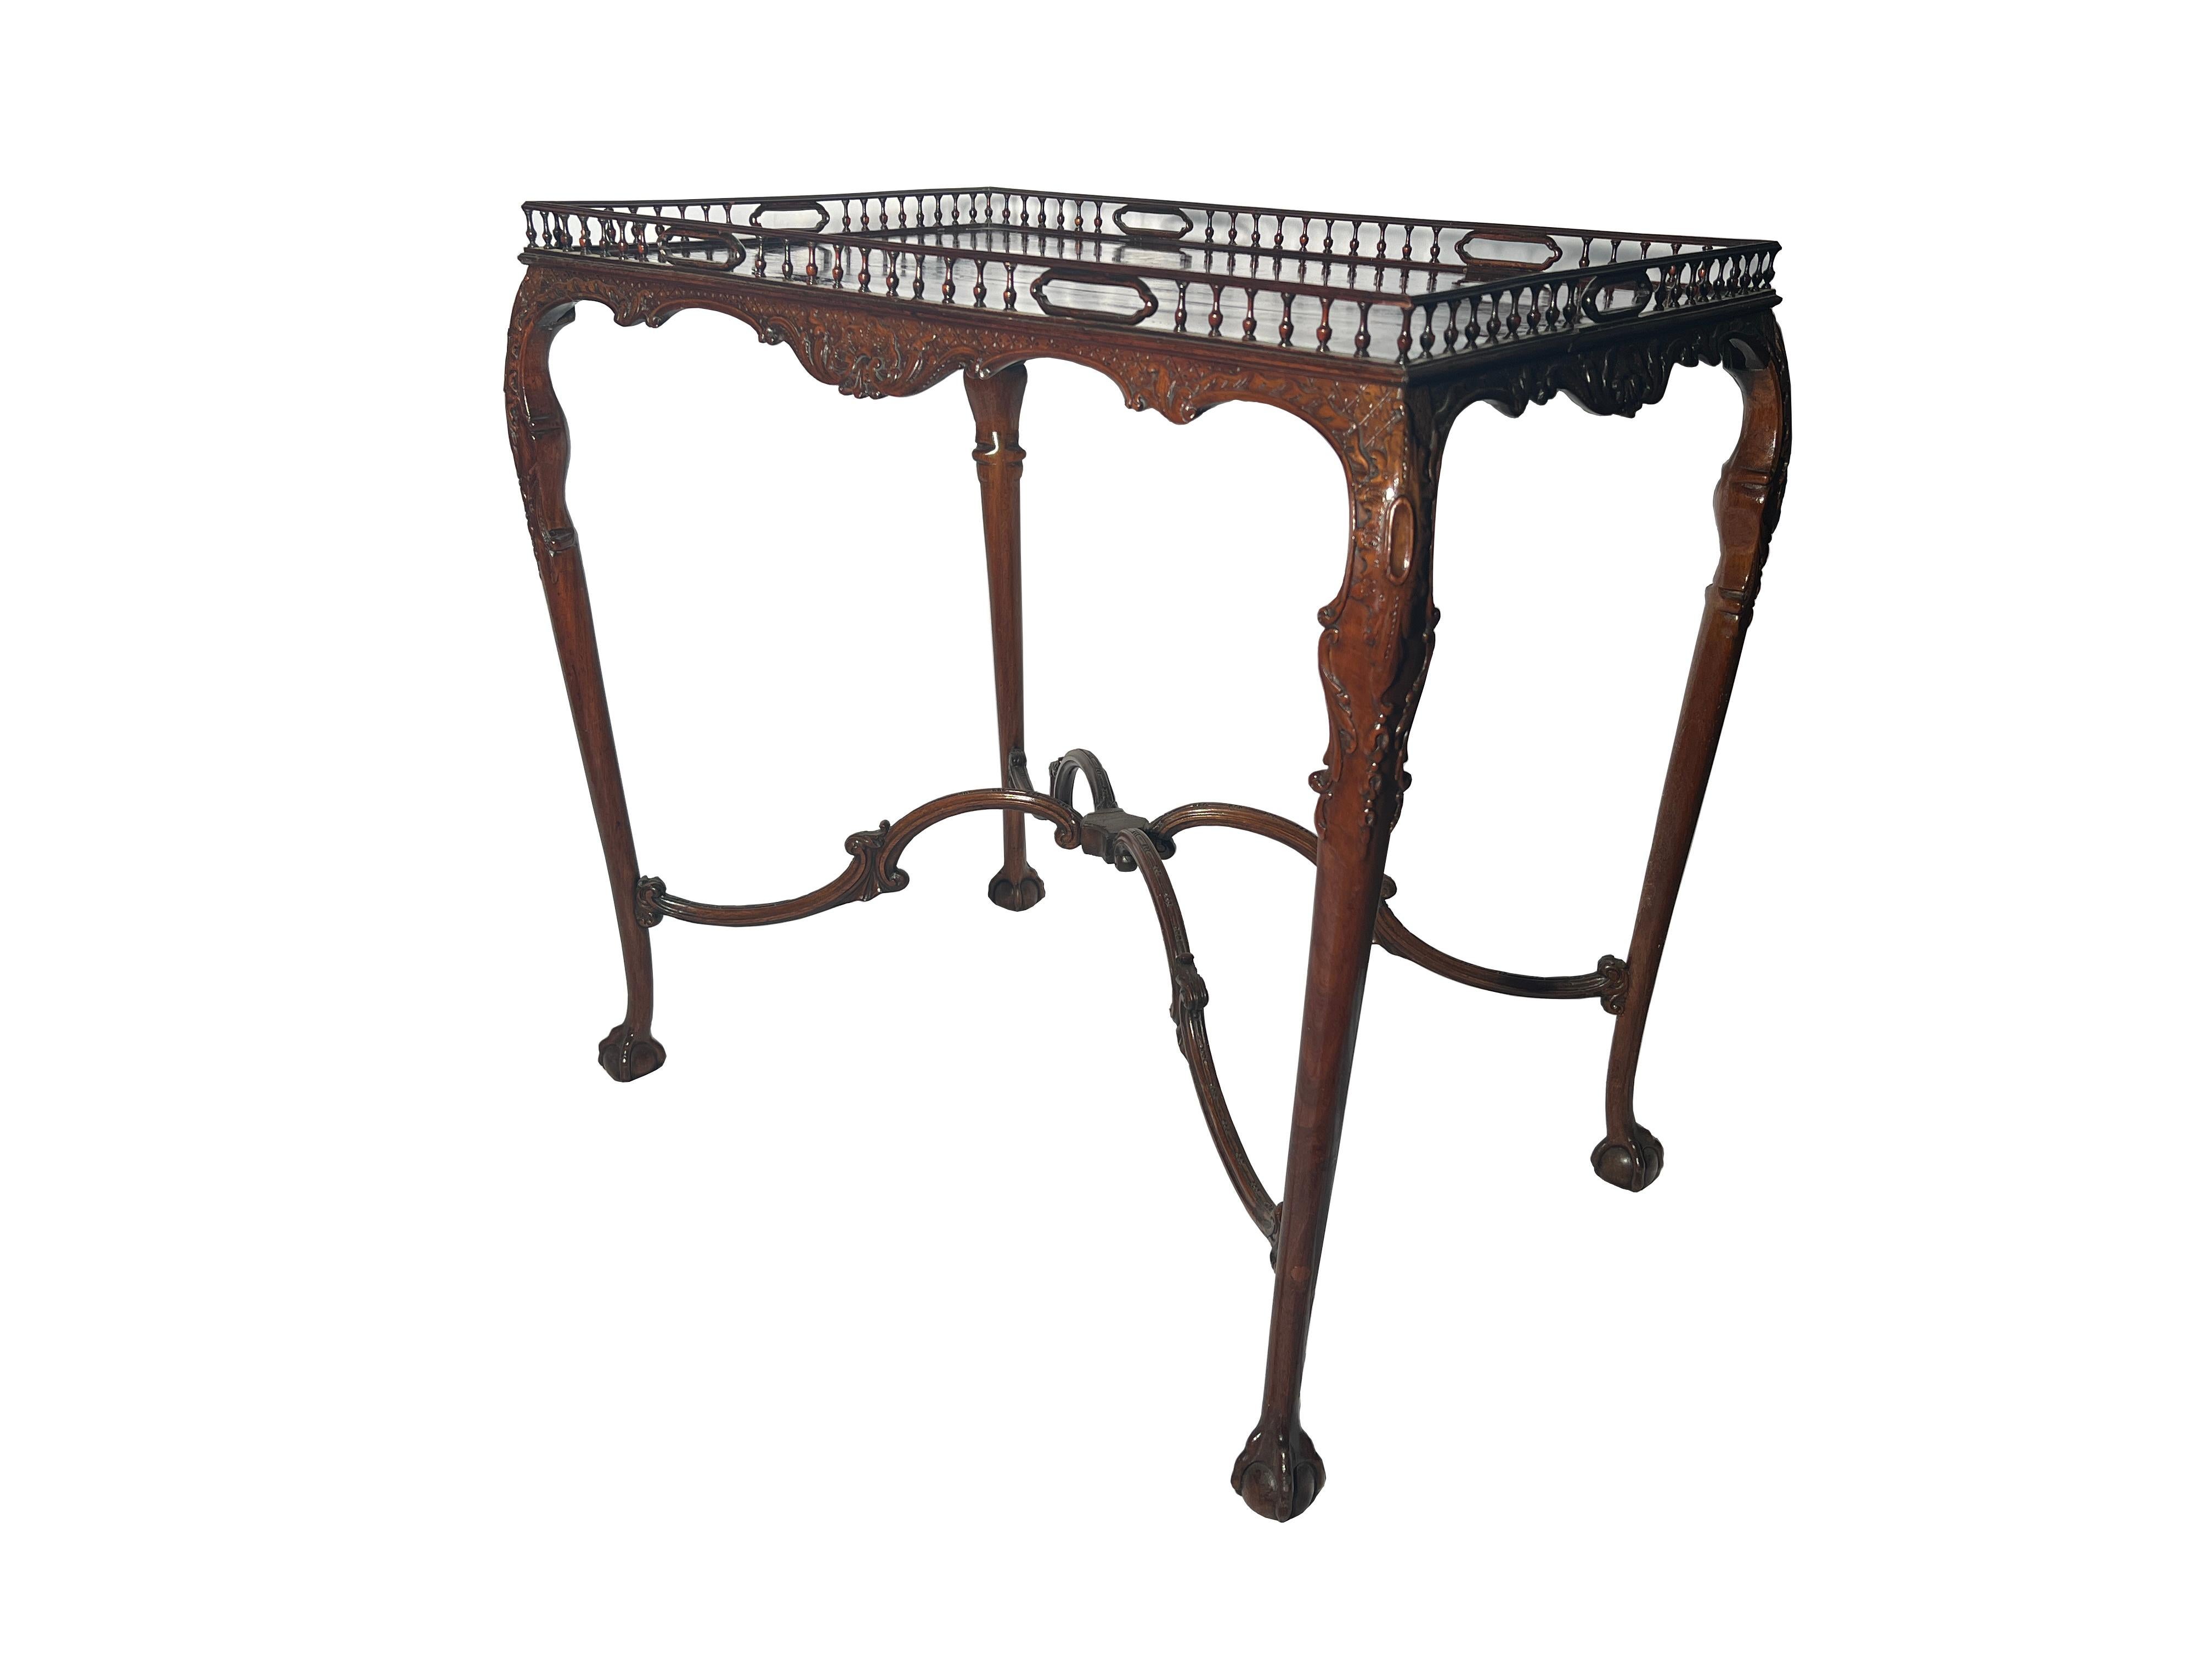 Exceptional Antique English Georgian Chippendale Style Mahogany Silver Table, Circa 1820's.